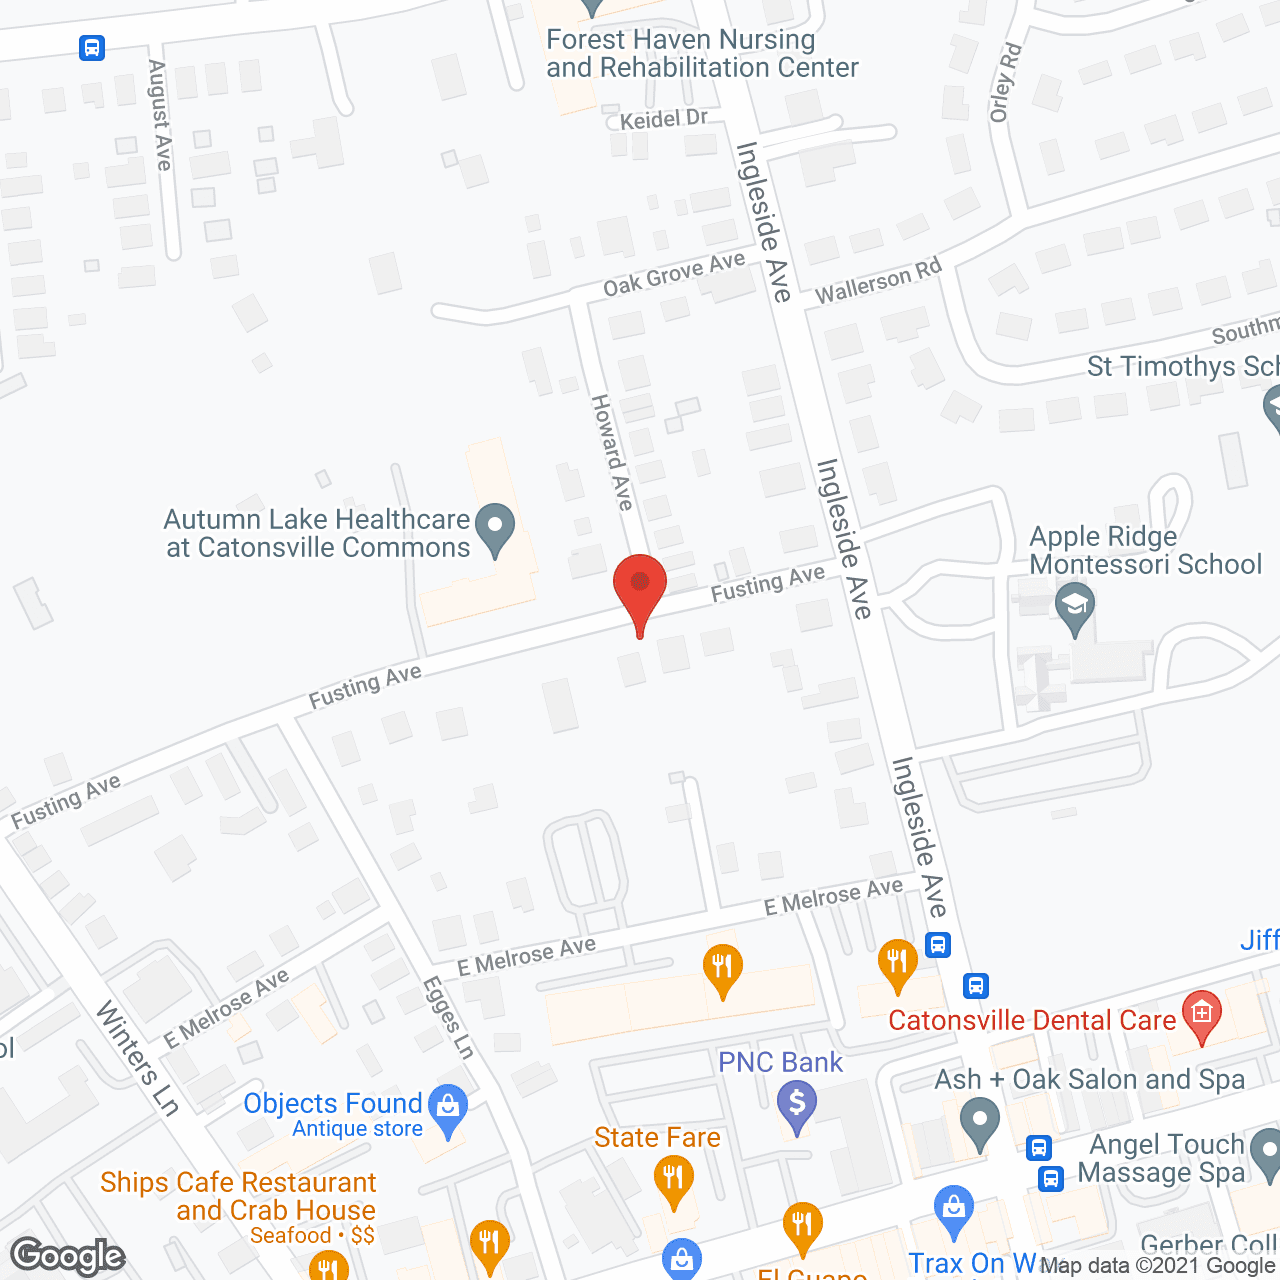 Catonsville Commons in google map